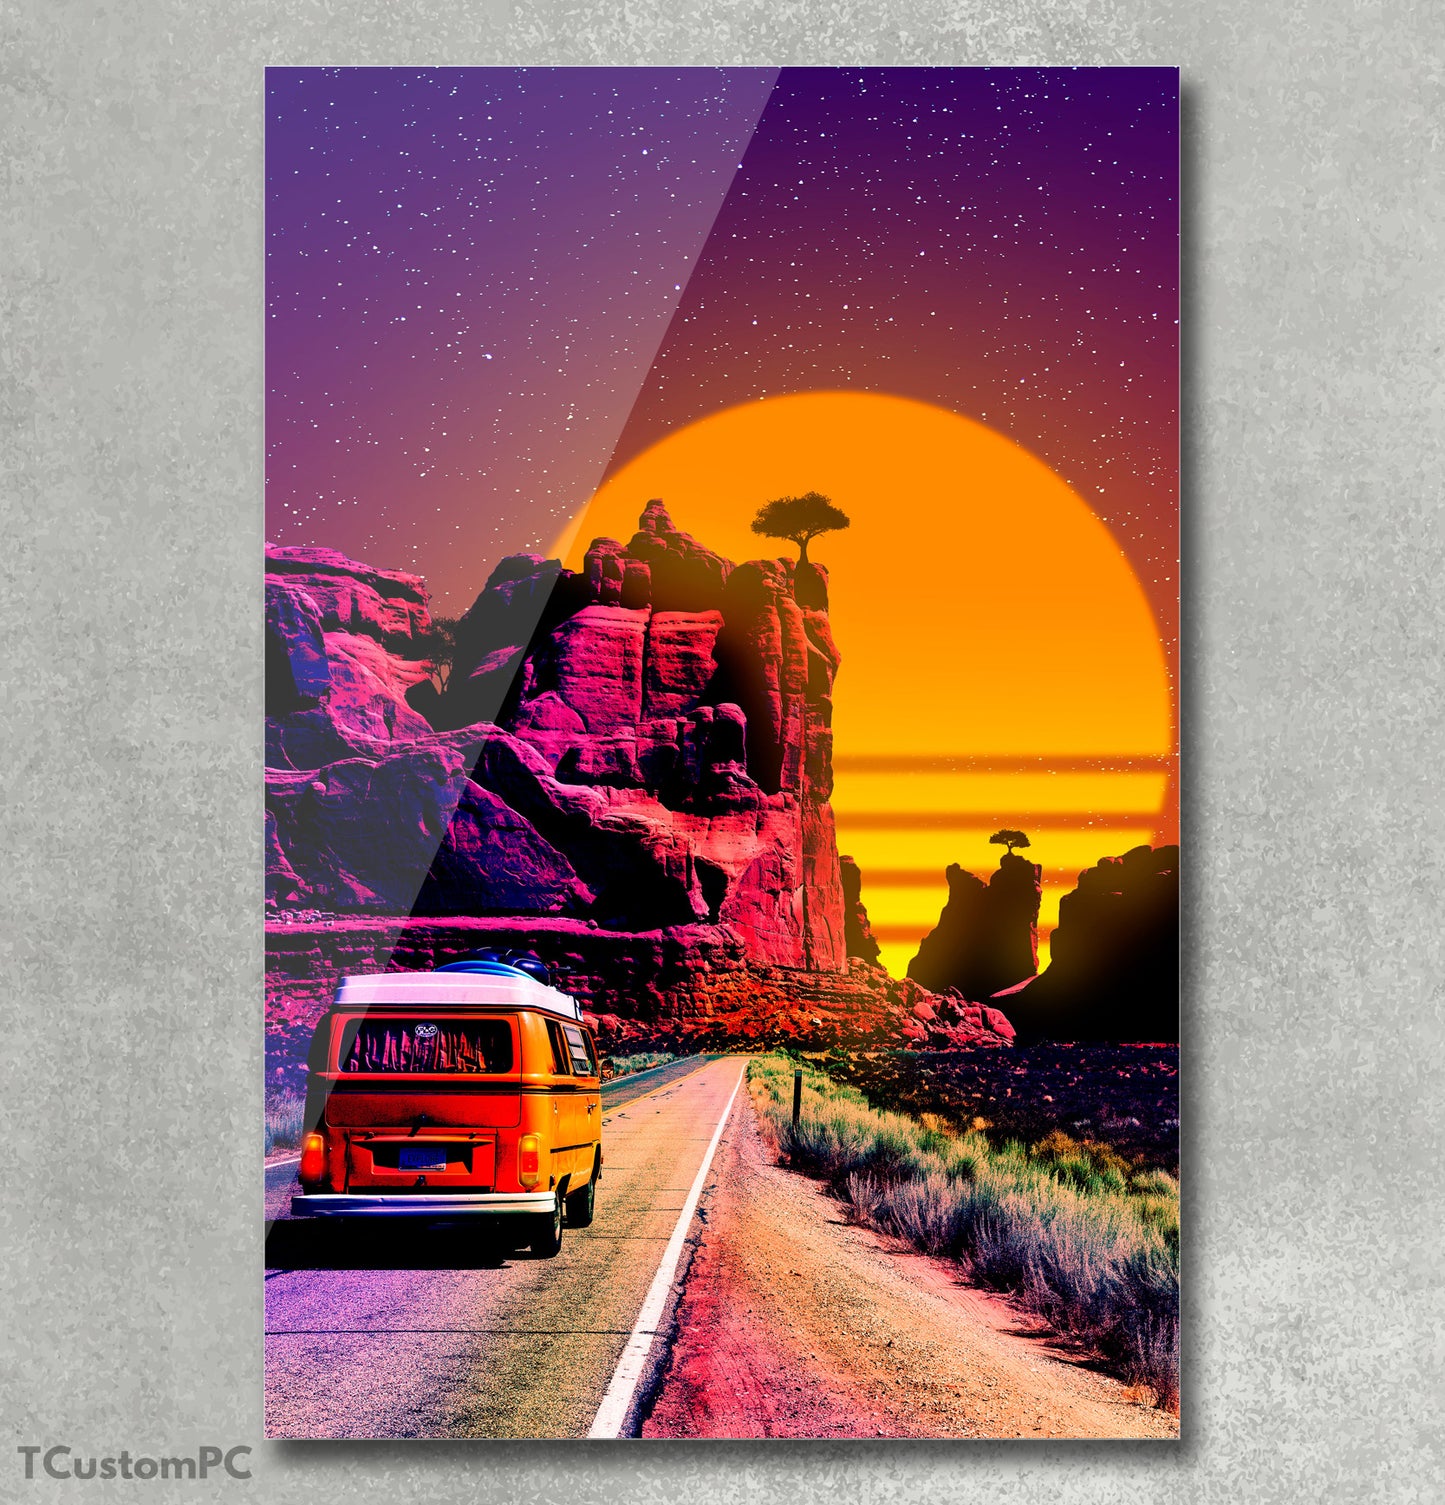 "Driving under sunset Cliff" painting